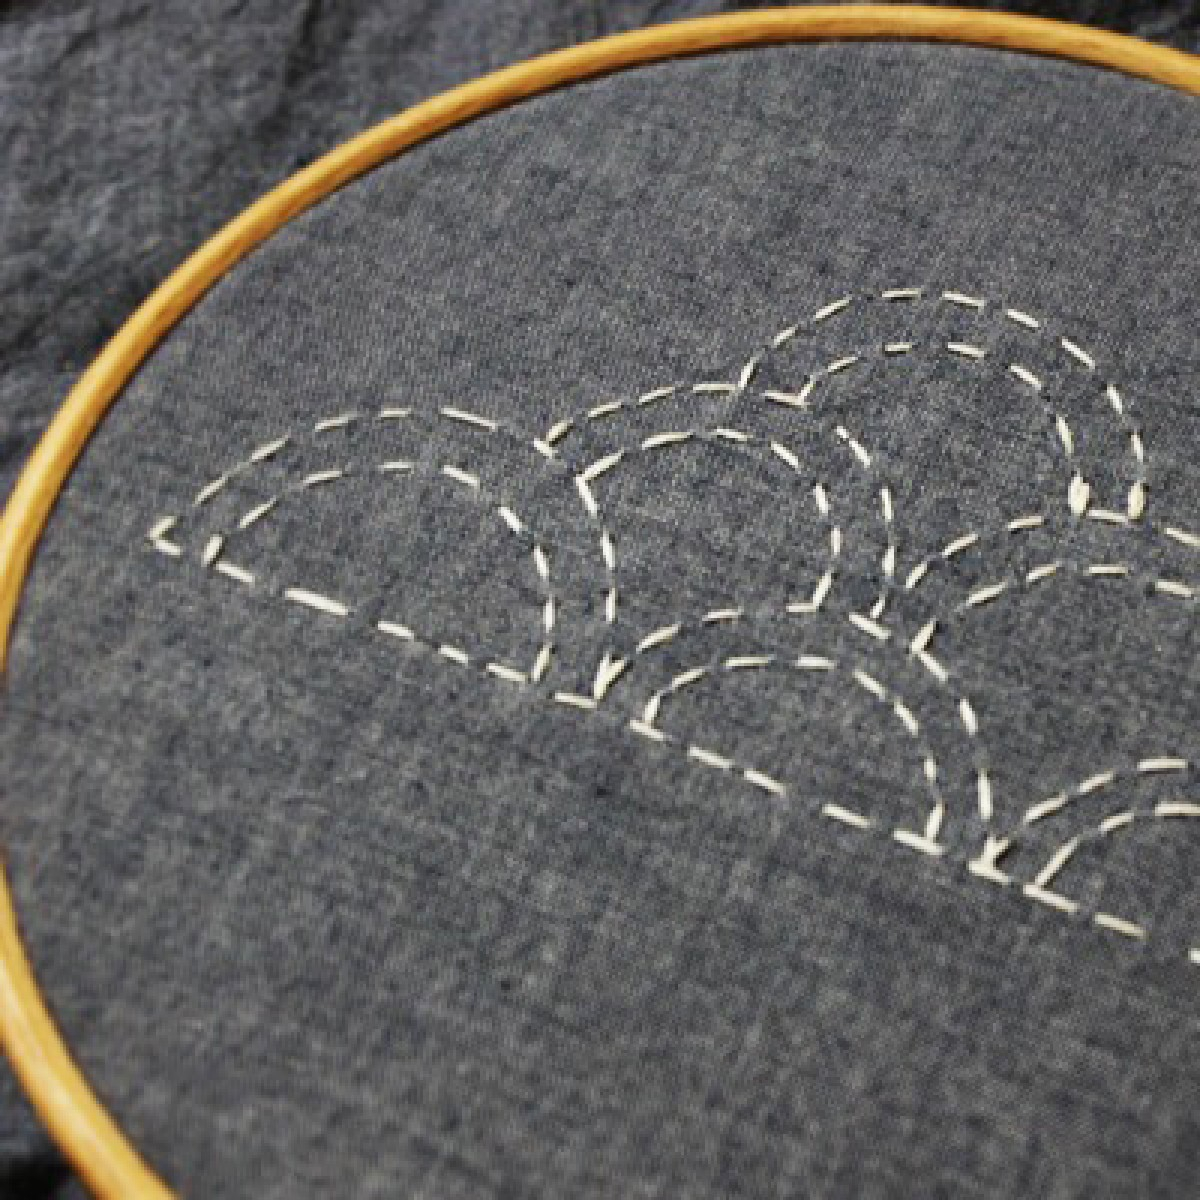 Japanese Embroidery Patterns Free Learn Simple Sashiko Embroidery With This Whimsical Cloud Pattern